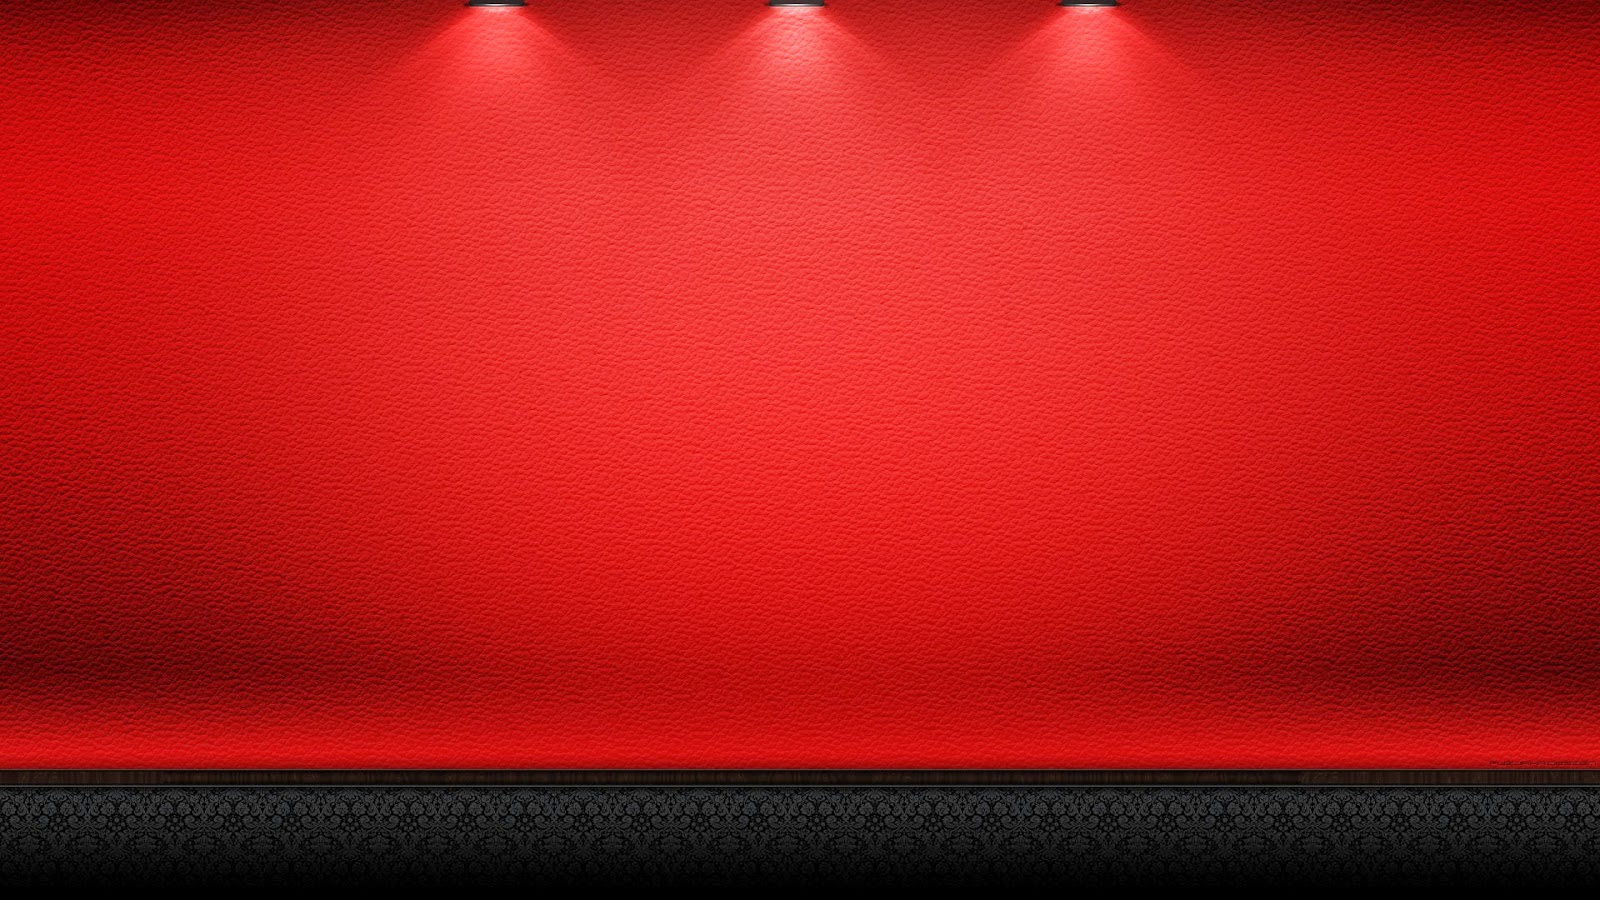 Collection of Black Red Wallpaper Designs on HDWallpapers